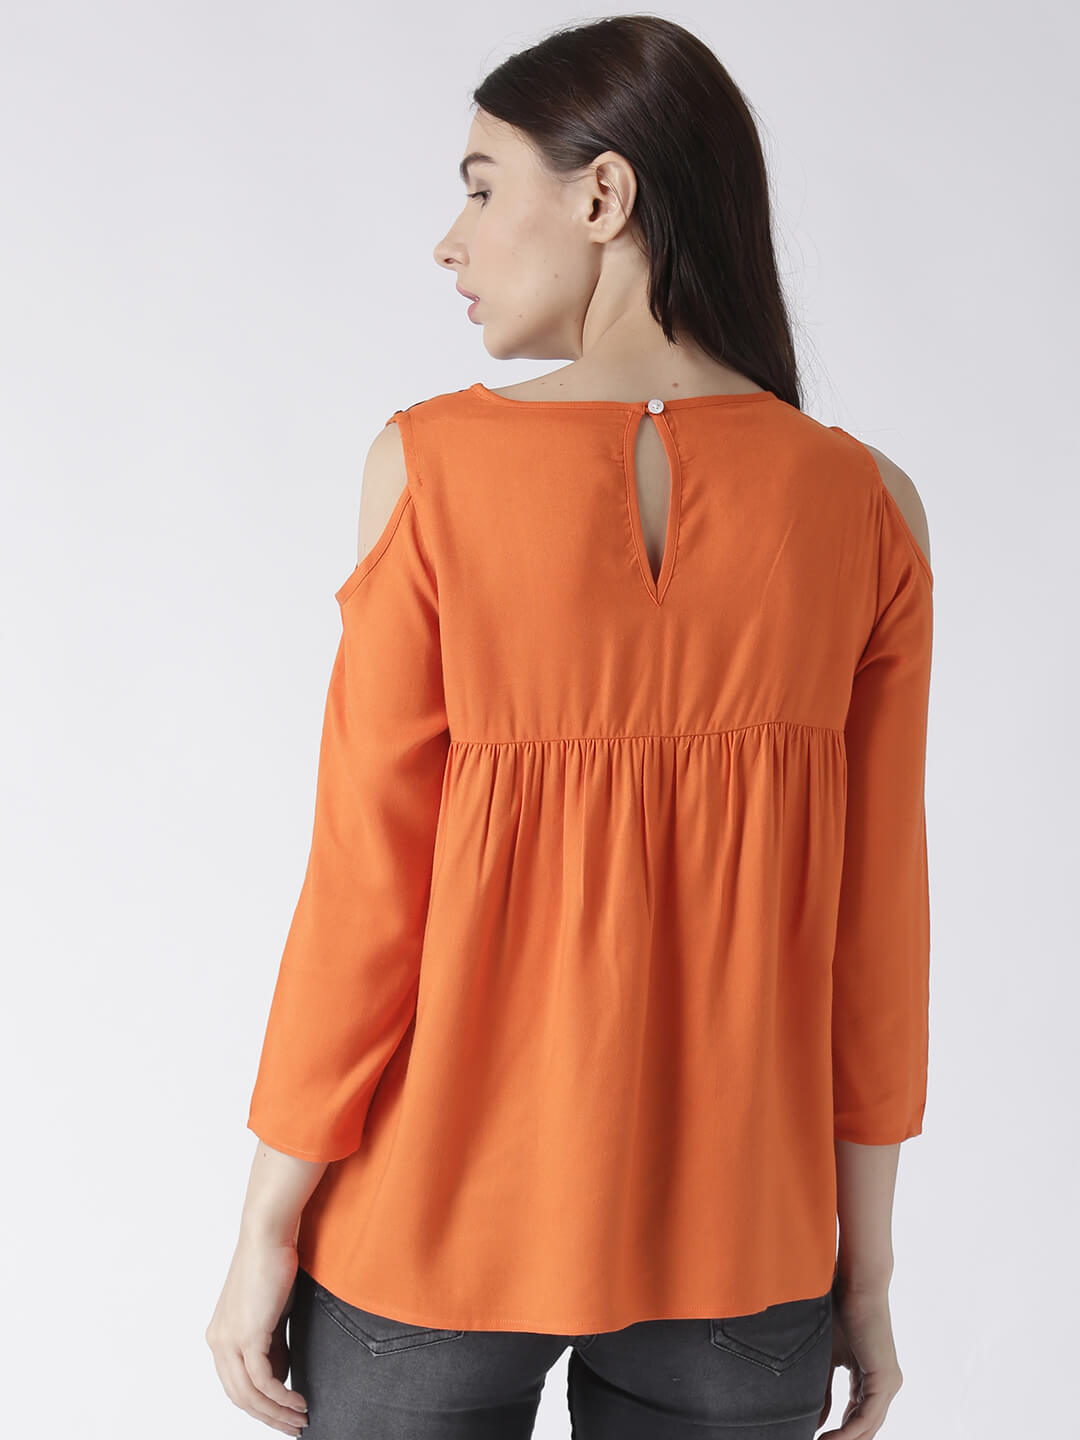 Msfq Women'S Orange Cold Shoulder Top With Yoke Embroidery